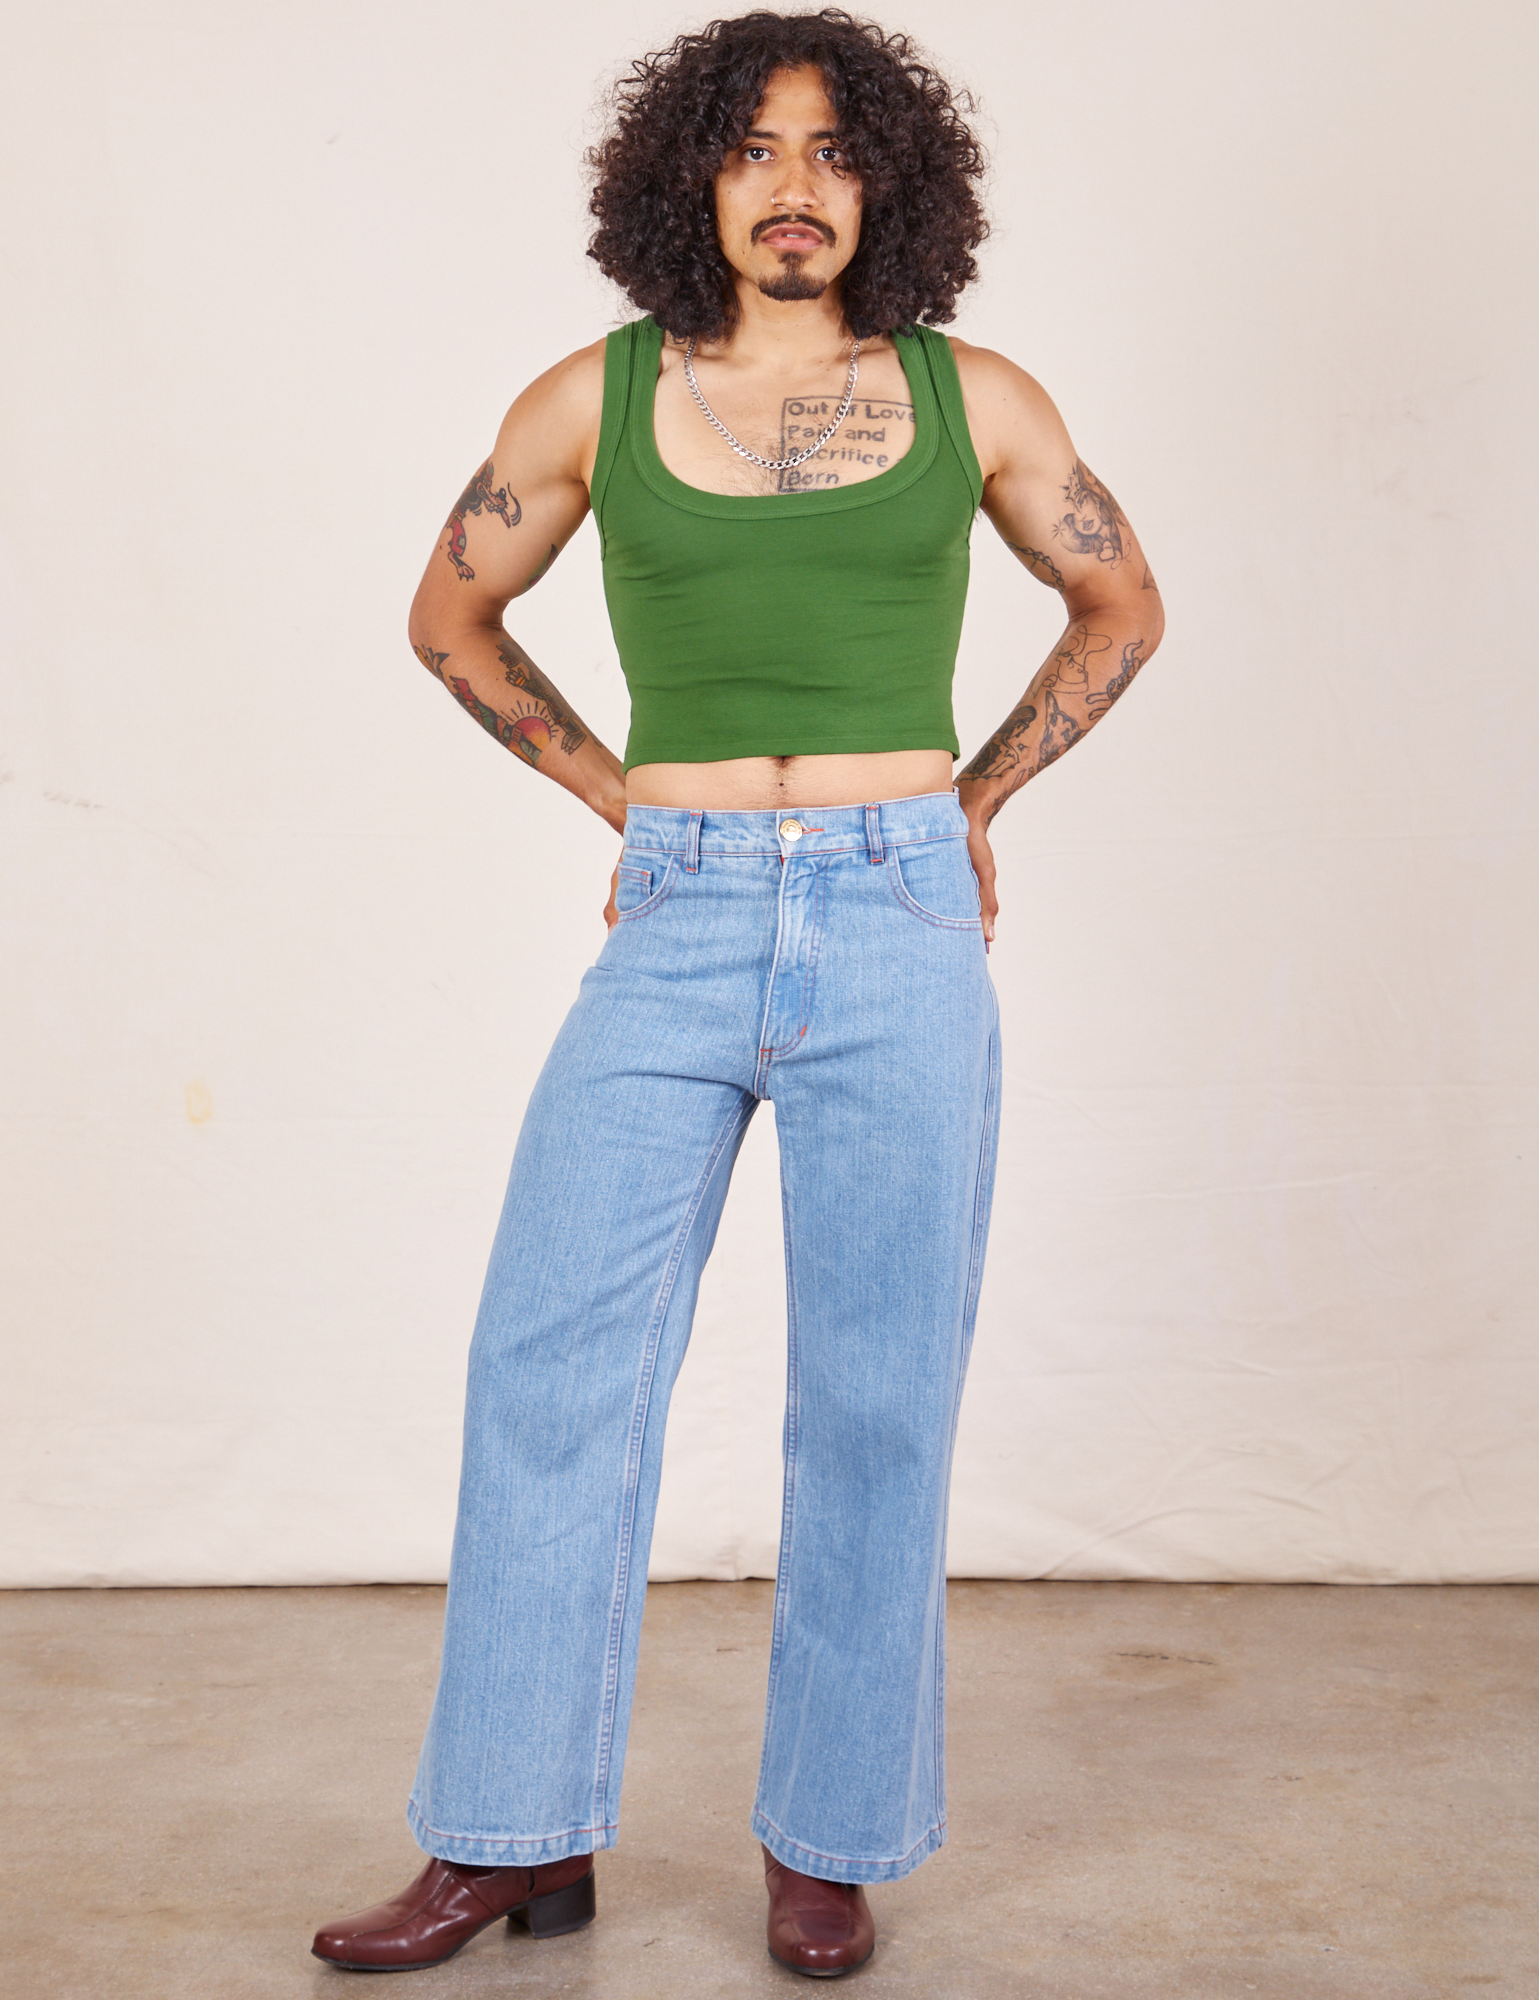 Jesse is wearing Cropped Tank Top in Lawn Green and light wash Sailor Jeans